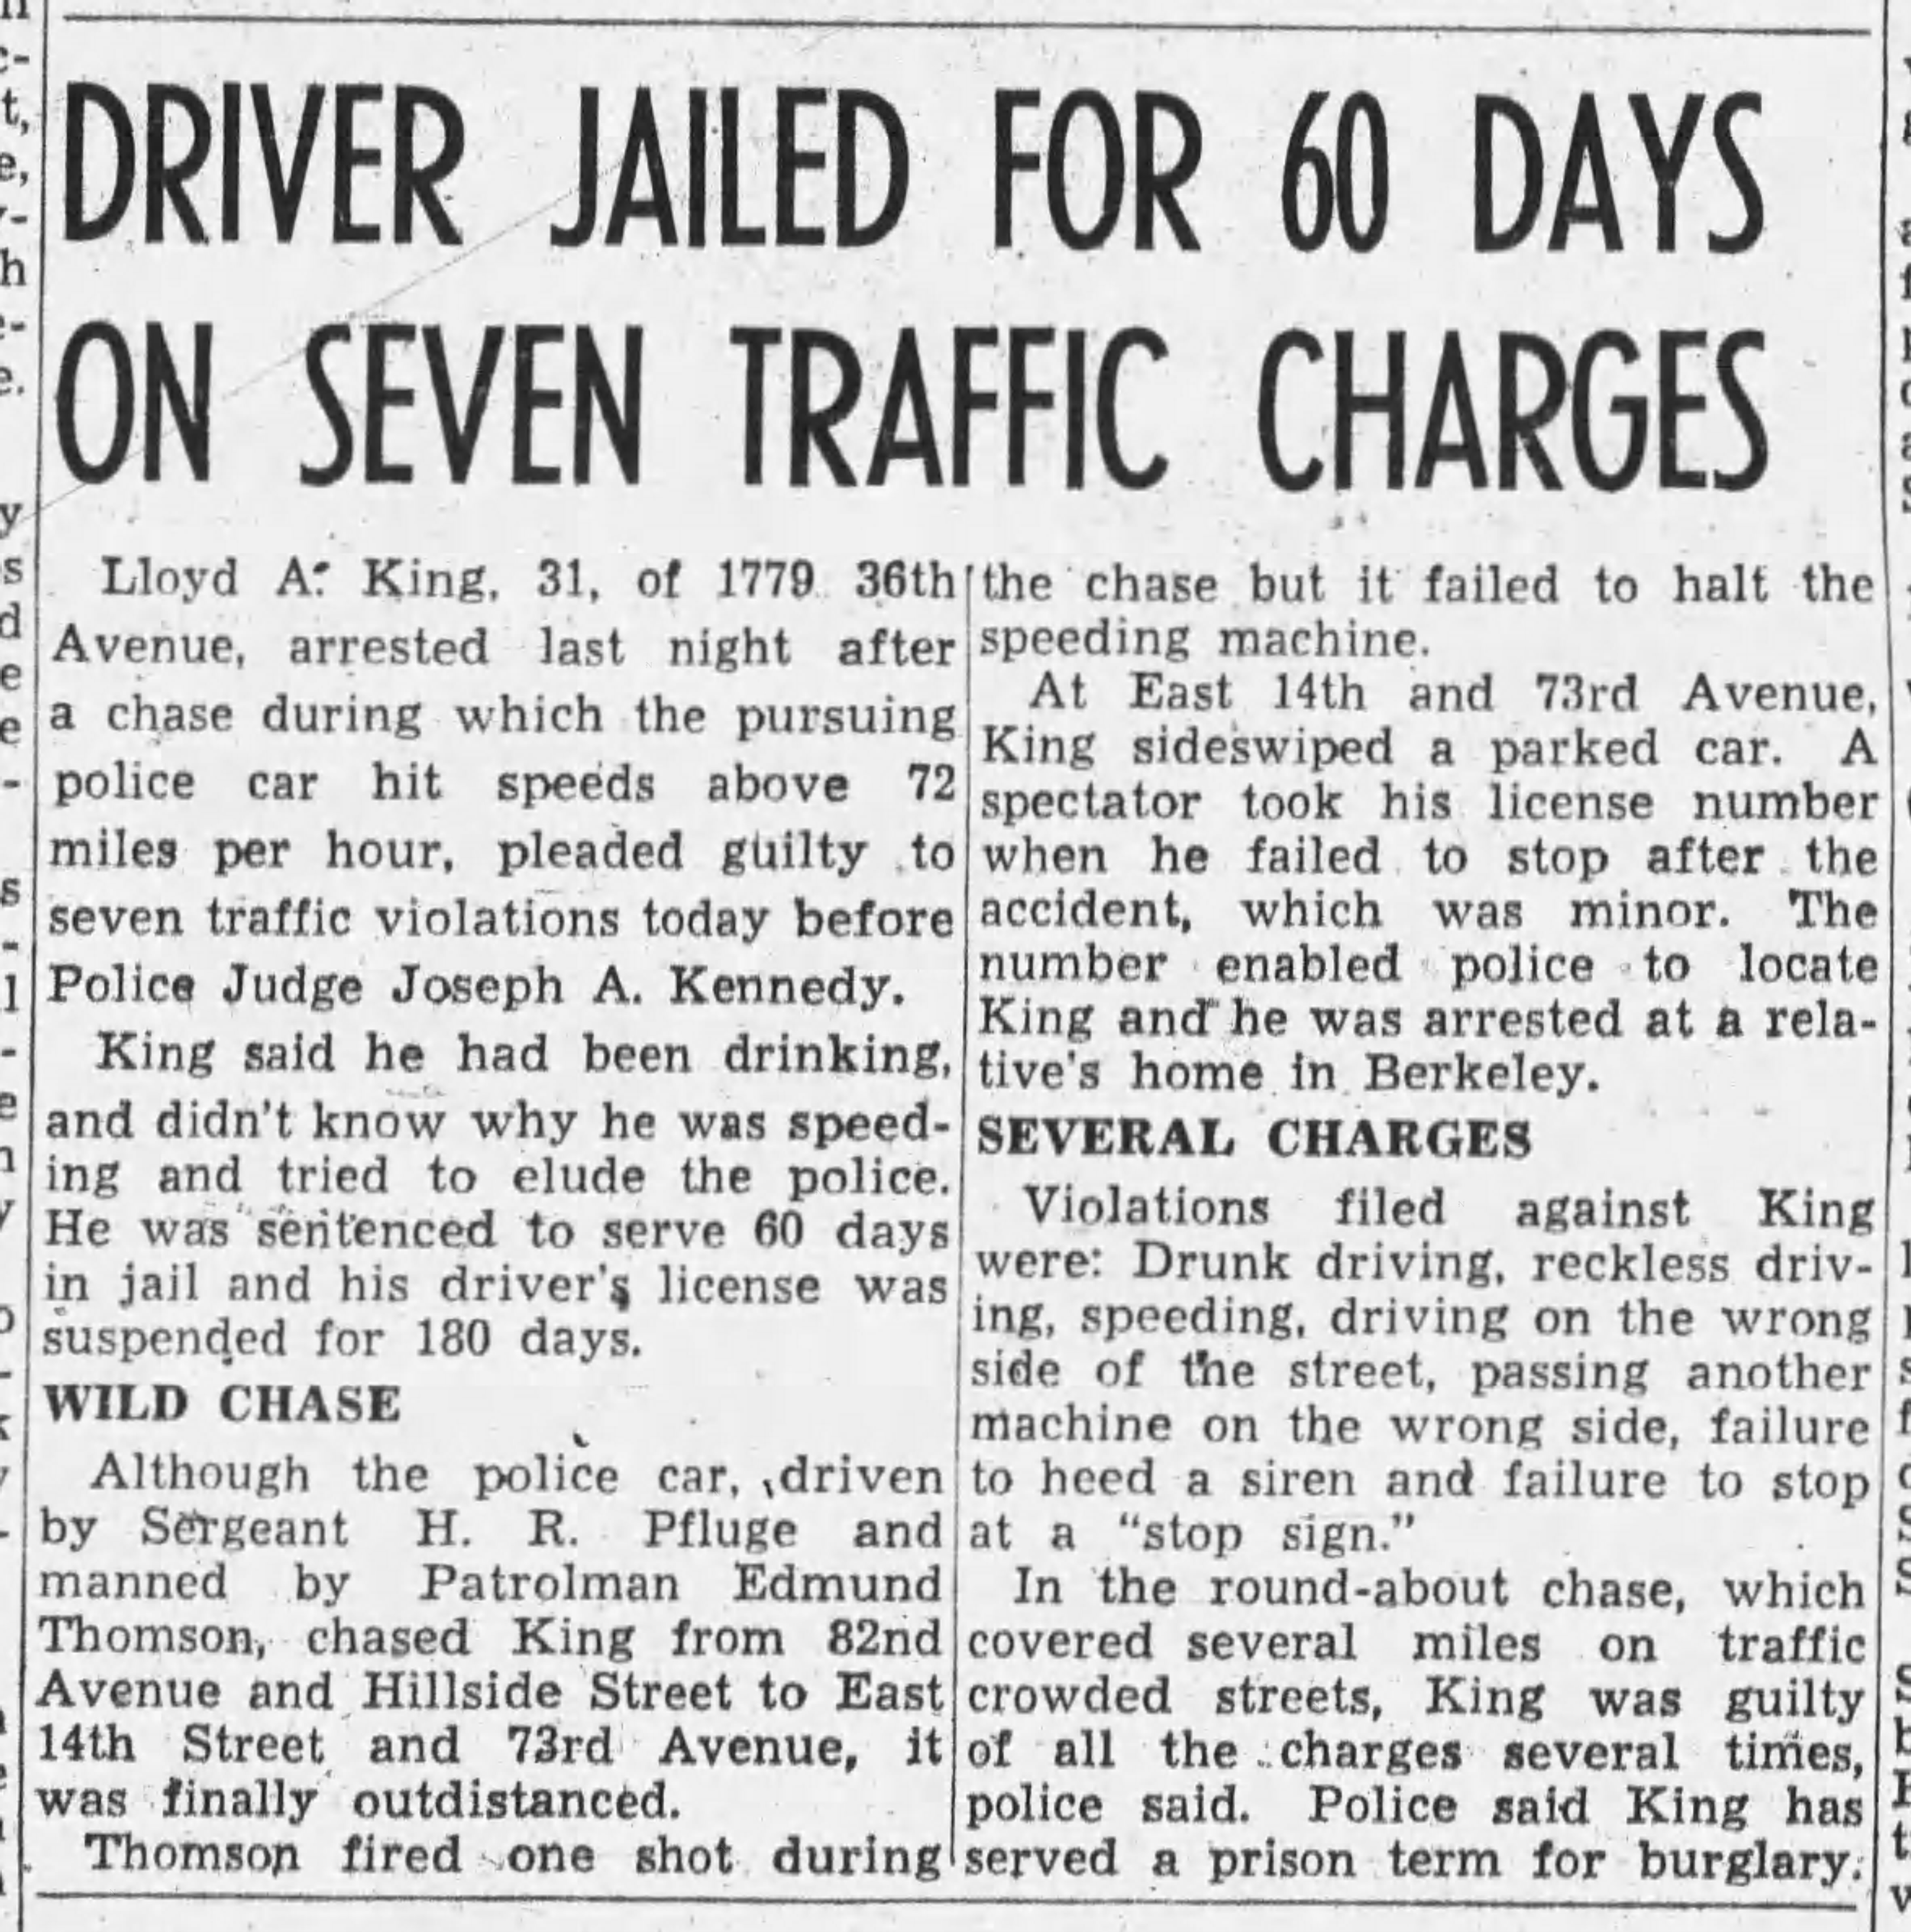 Article about the arrest of Lloyd King for drunken driving and a car chase by the police